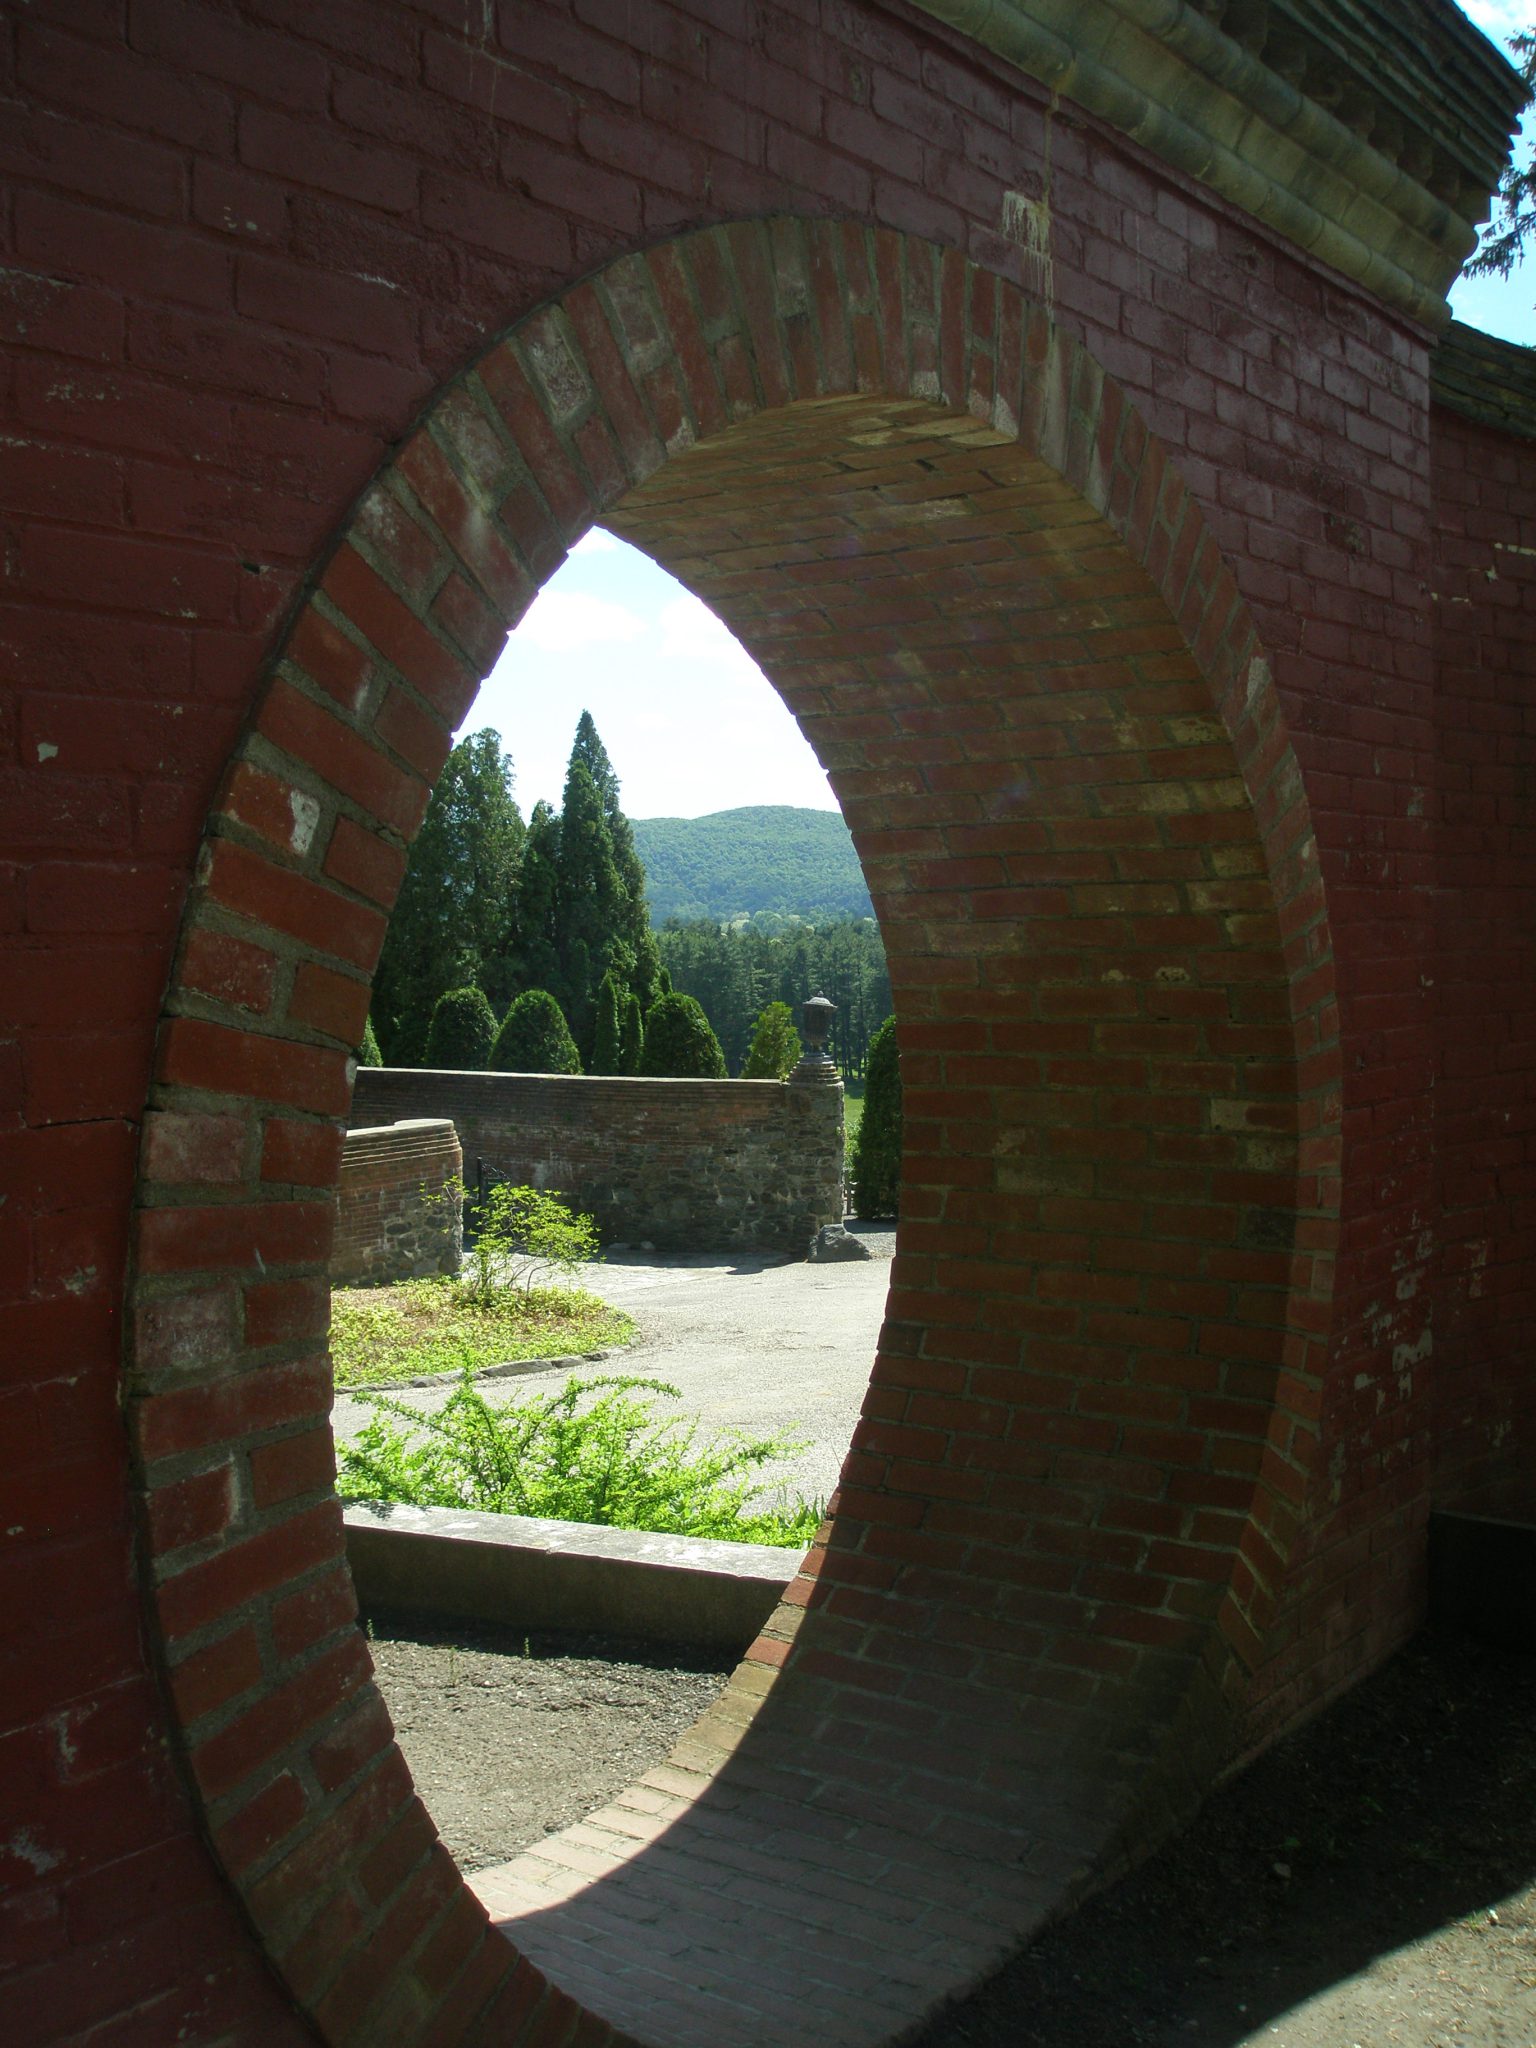 View through the Moon Gate, out toward the Arborvitae Walk, and the Western hills.